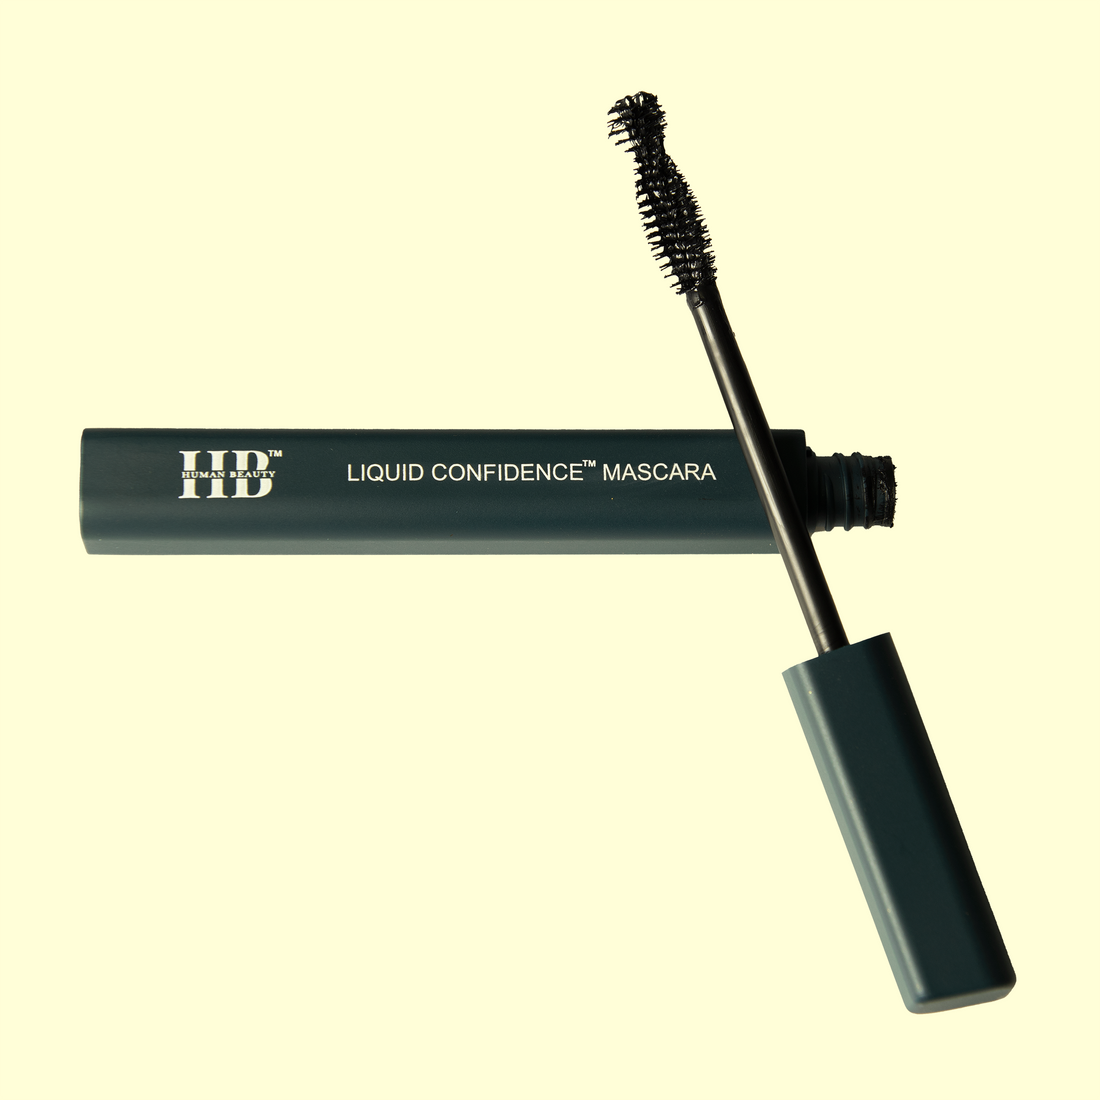 The Liquid Confidence Mascara open on a light yellow background.